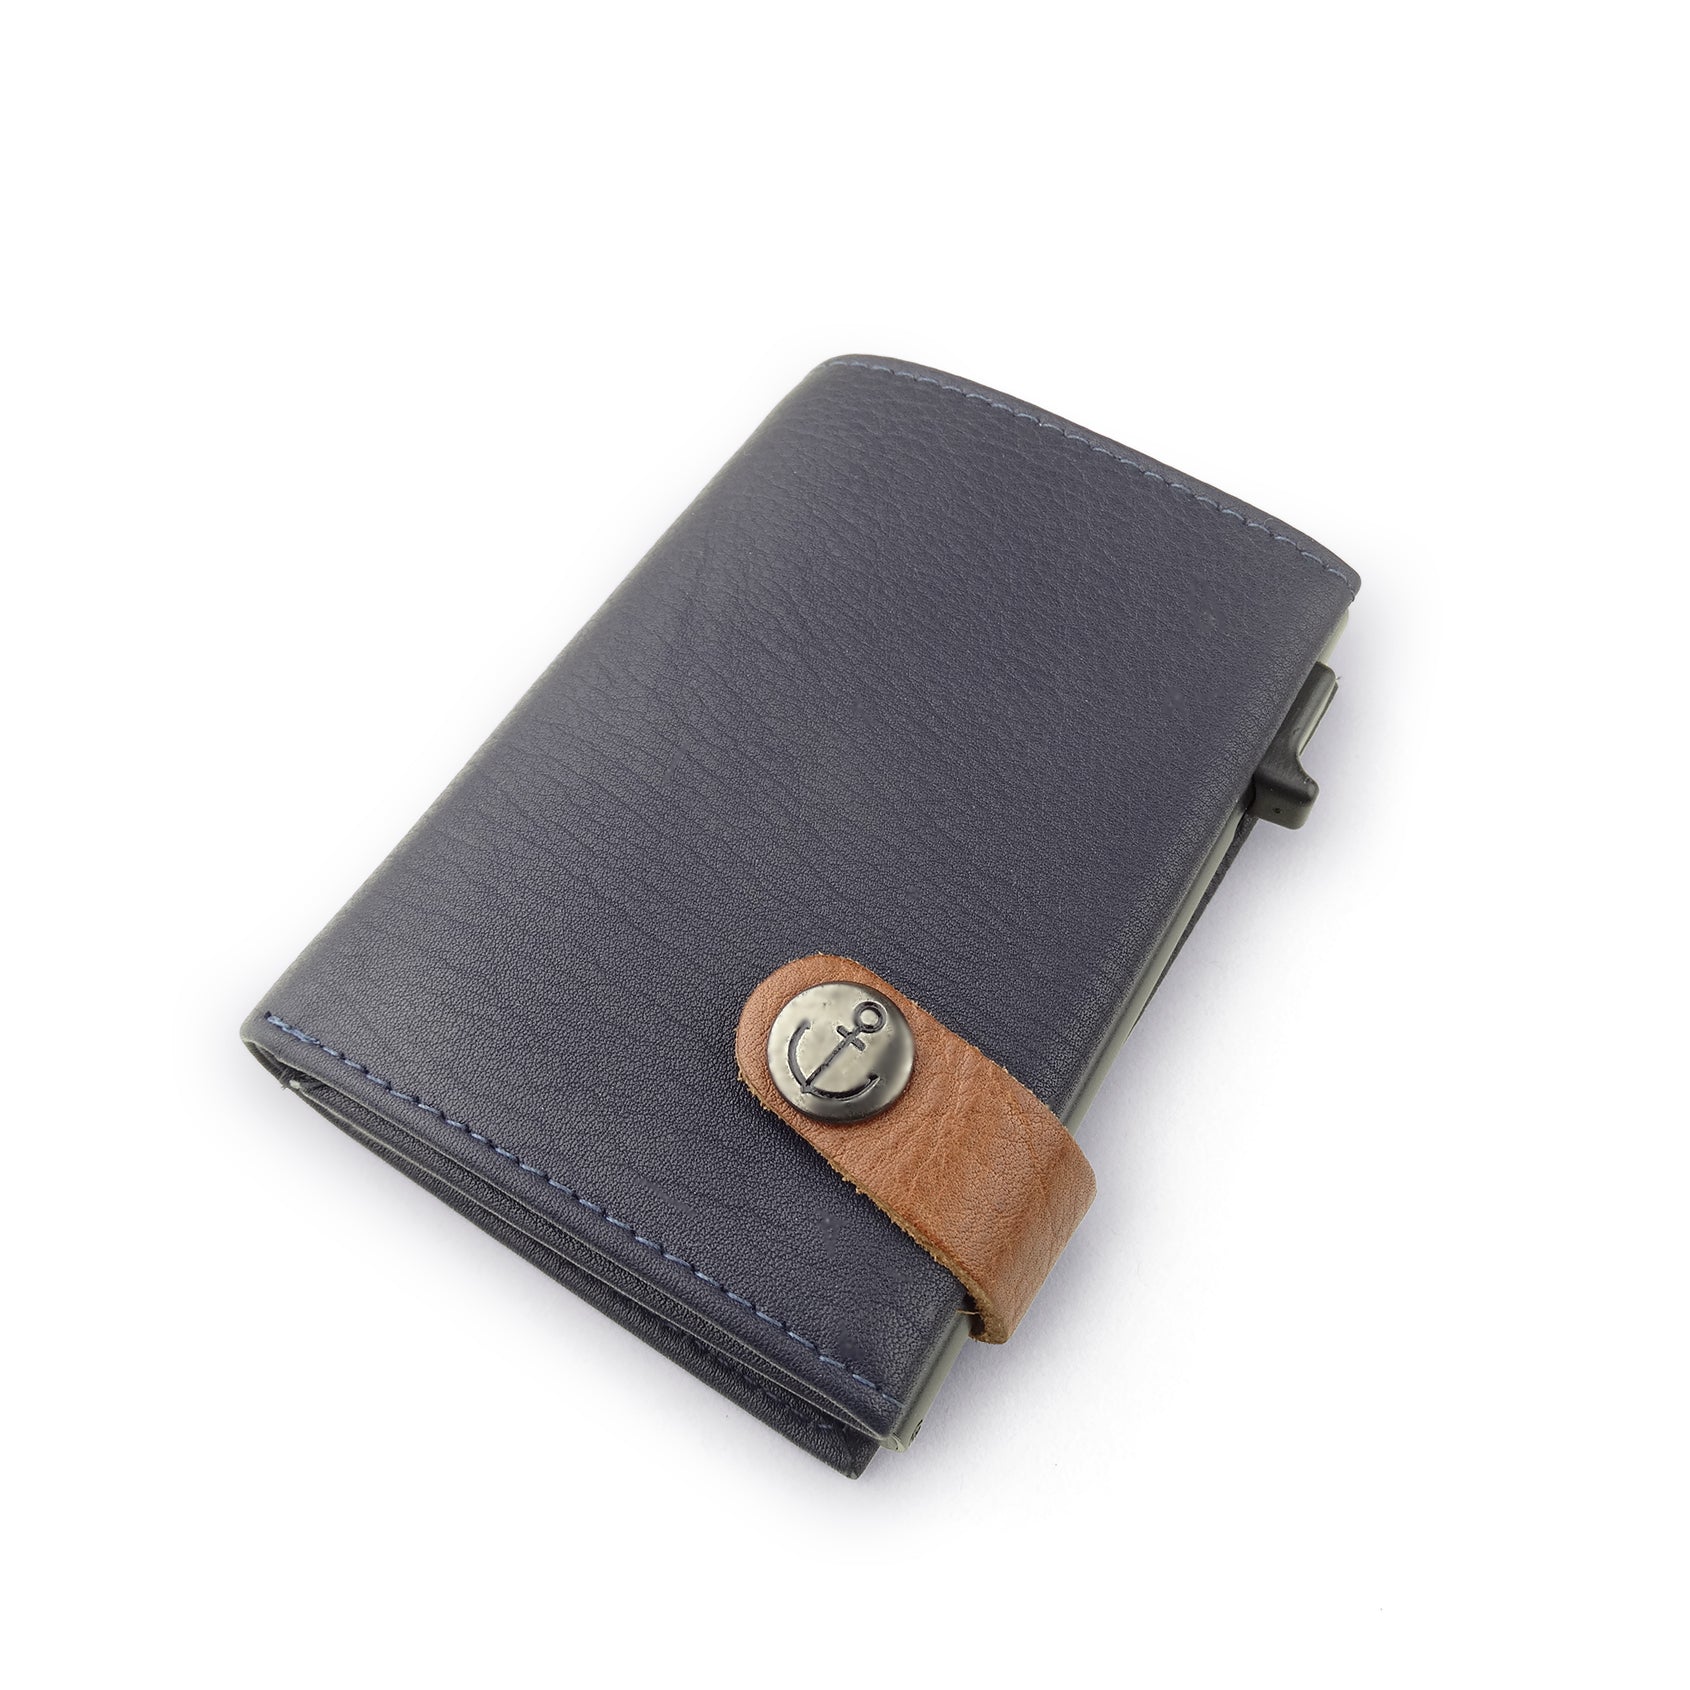 Leather bank card holder with extra pocket